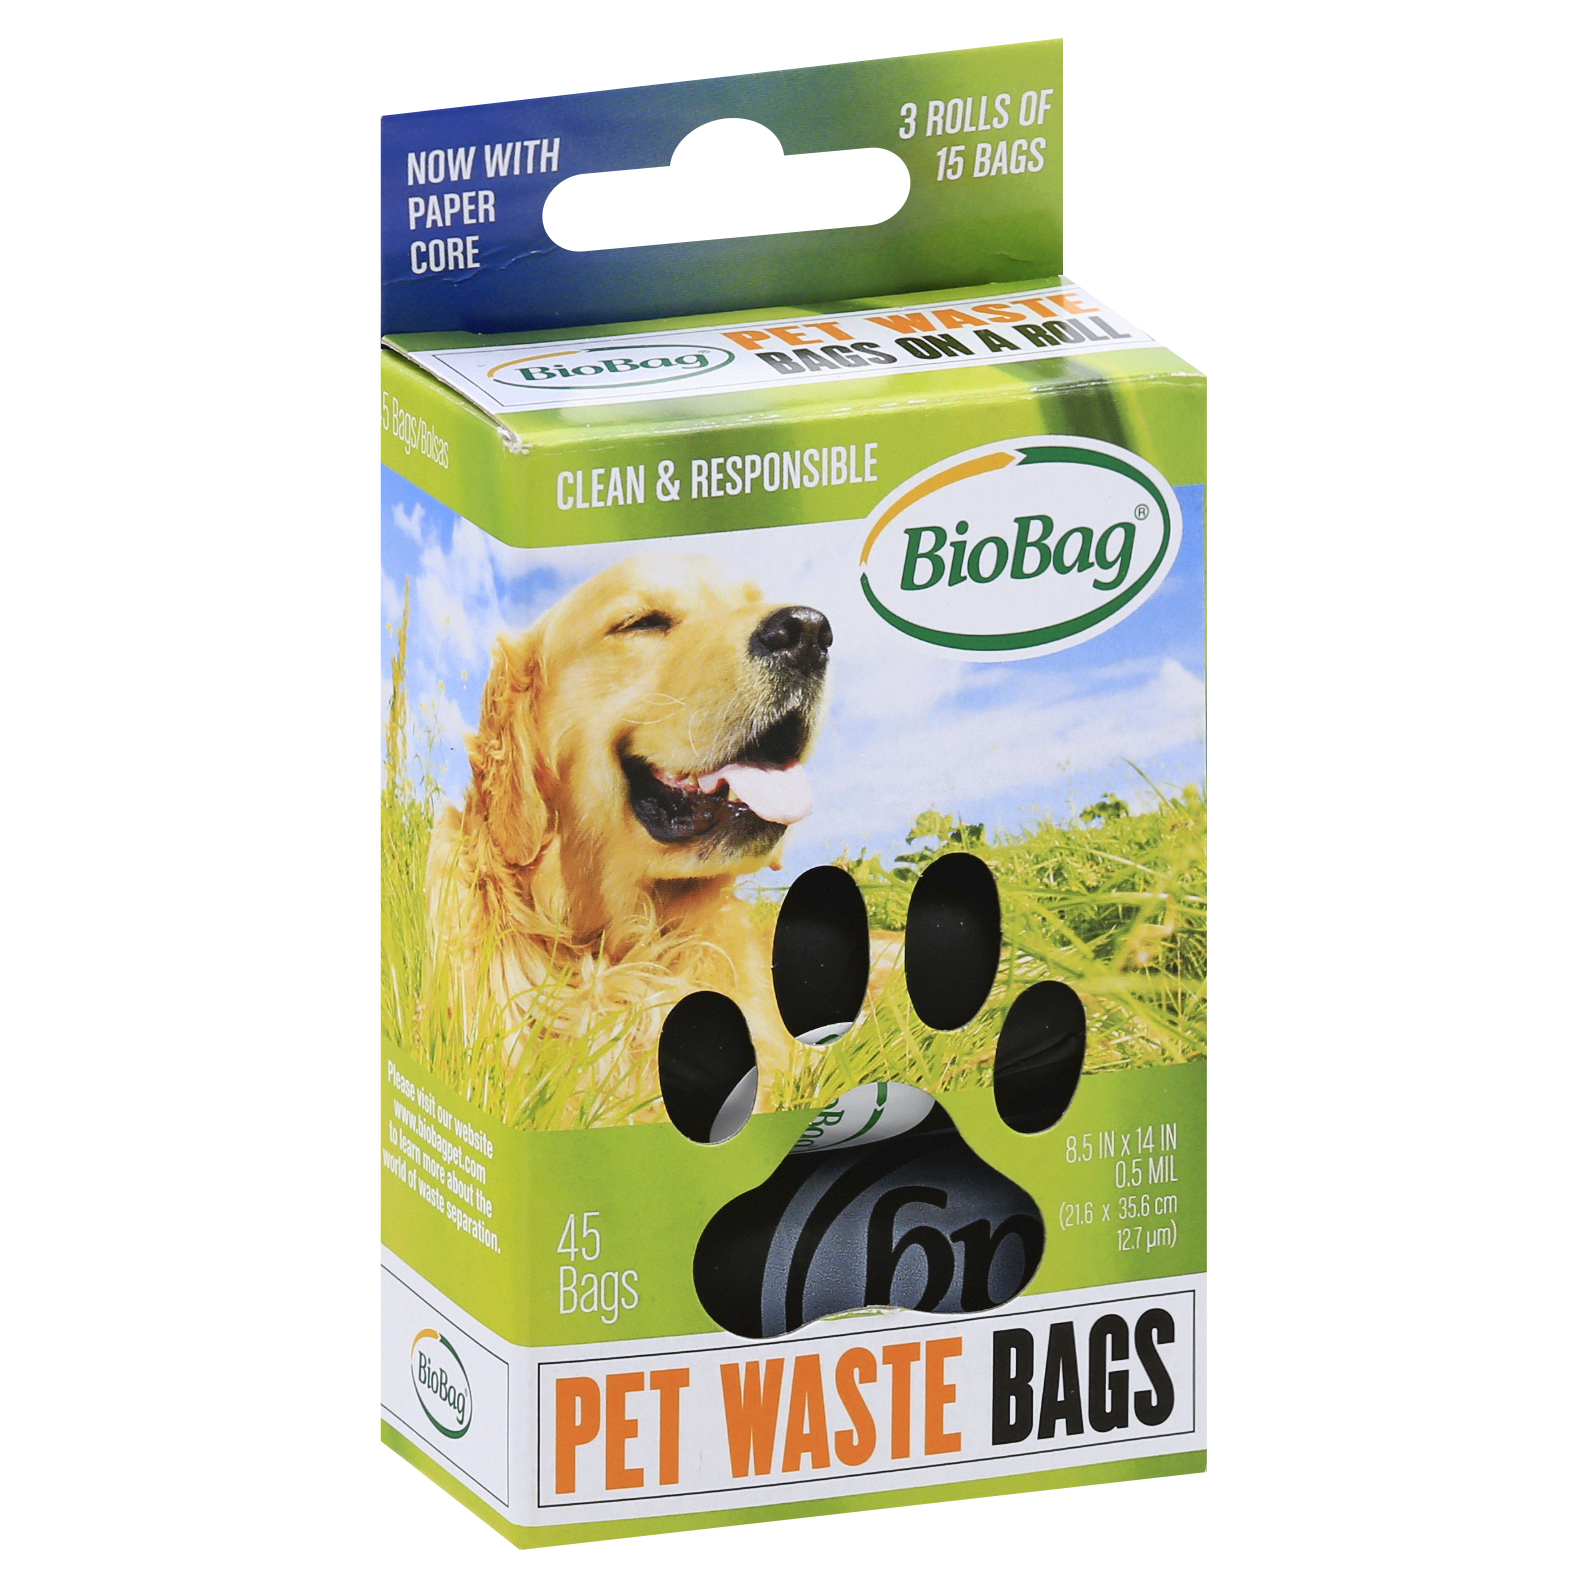 aluminium Mening Ale Pet Waste Bags on roll made from plants - 726 - GreenLine Paper Company